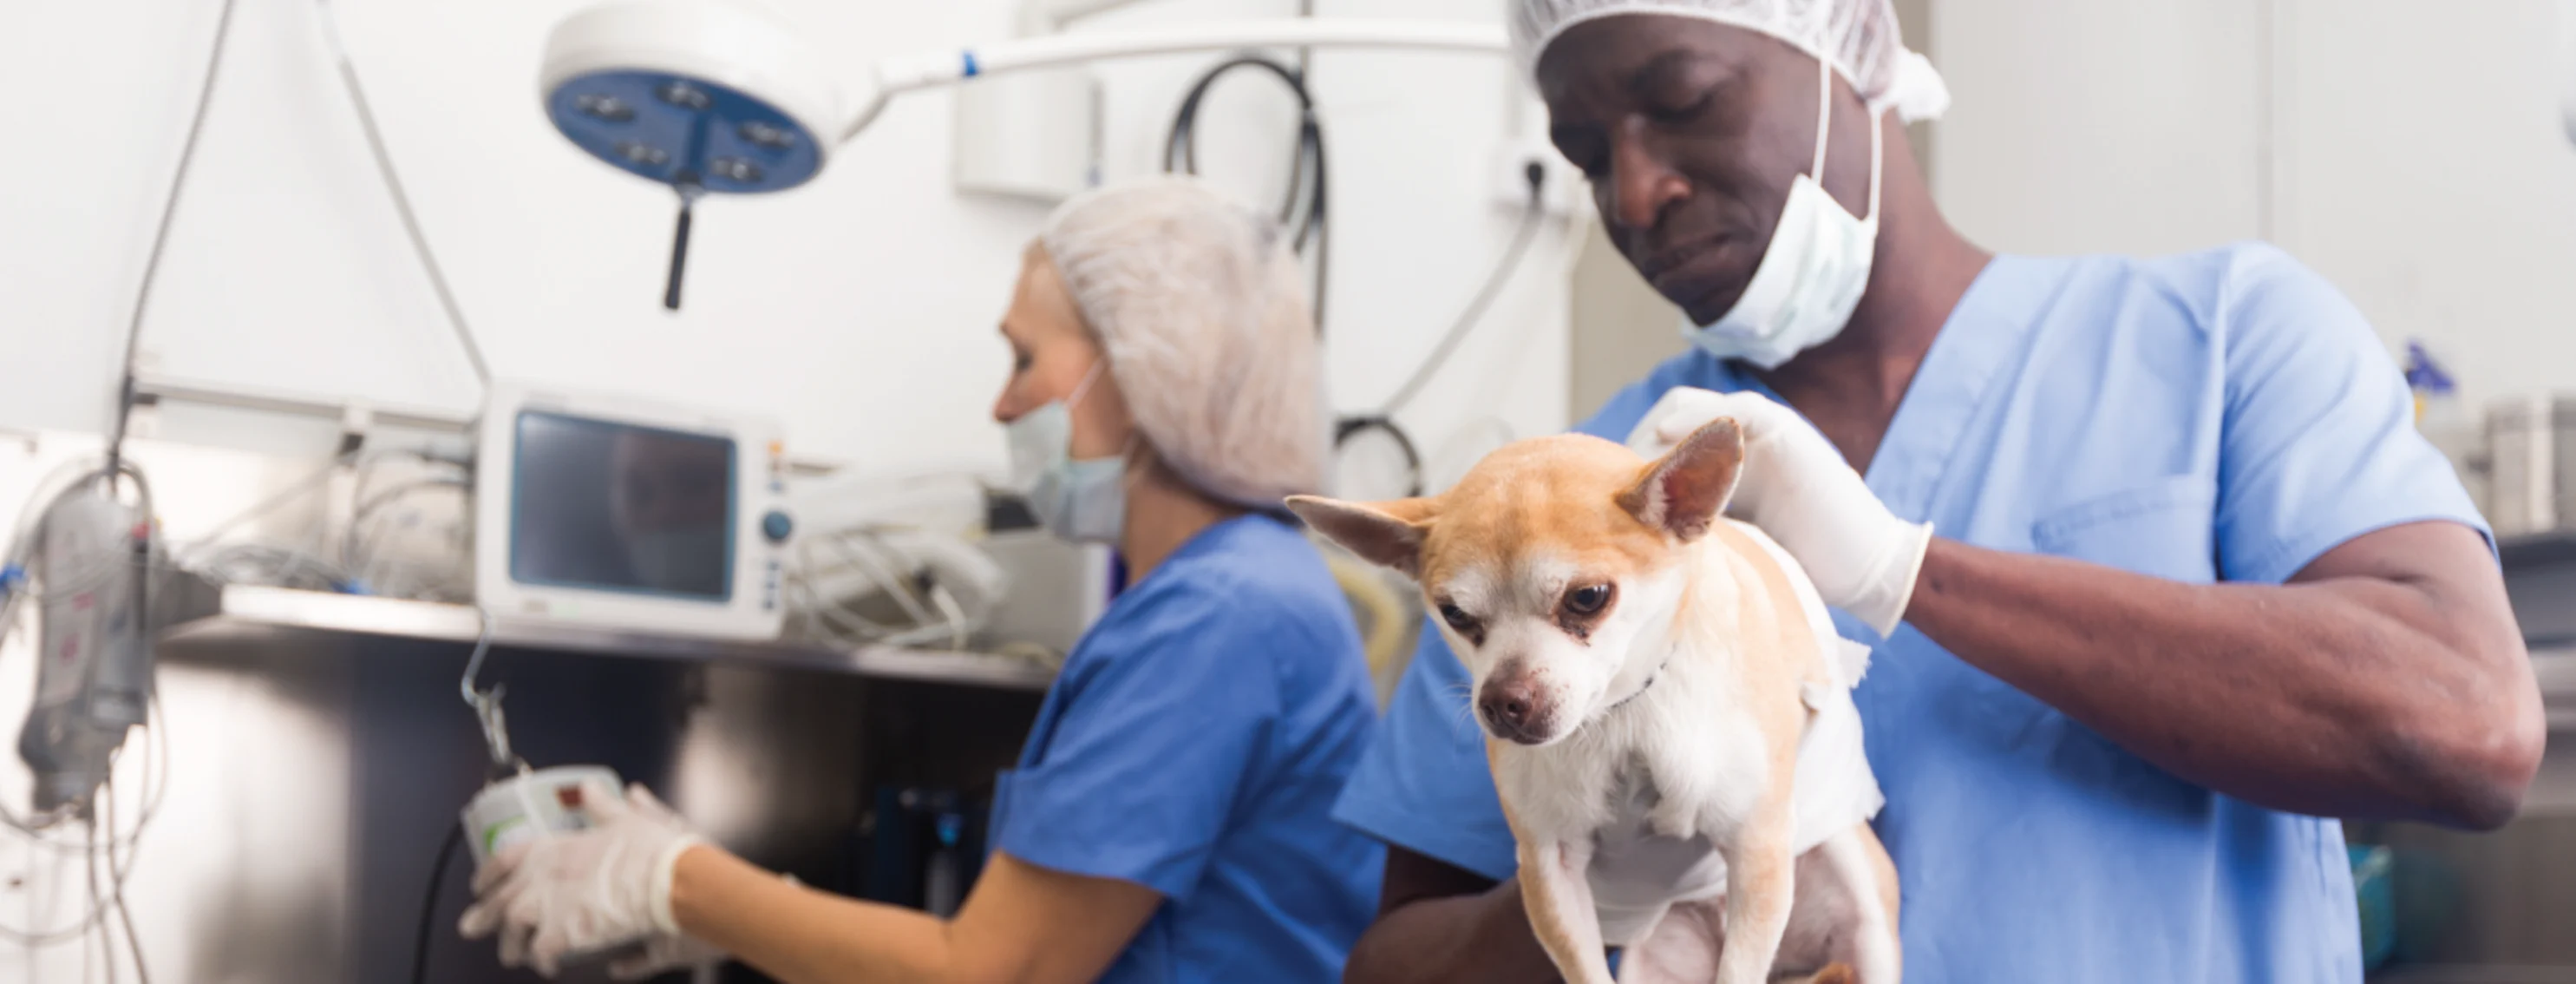 Dog on surgery table with veterinarian